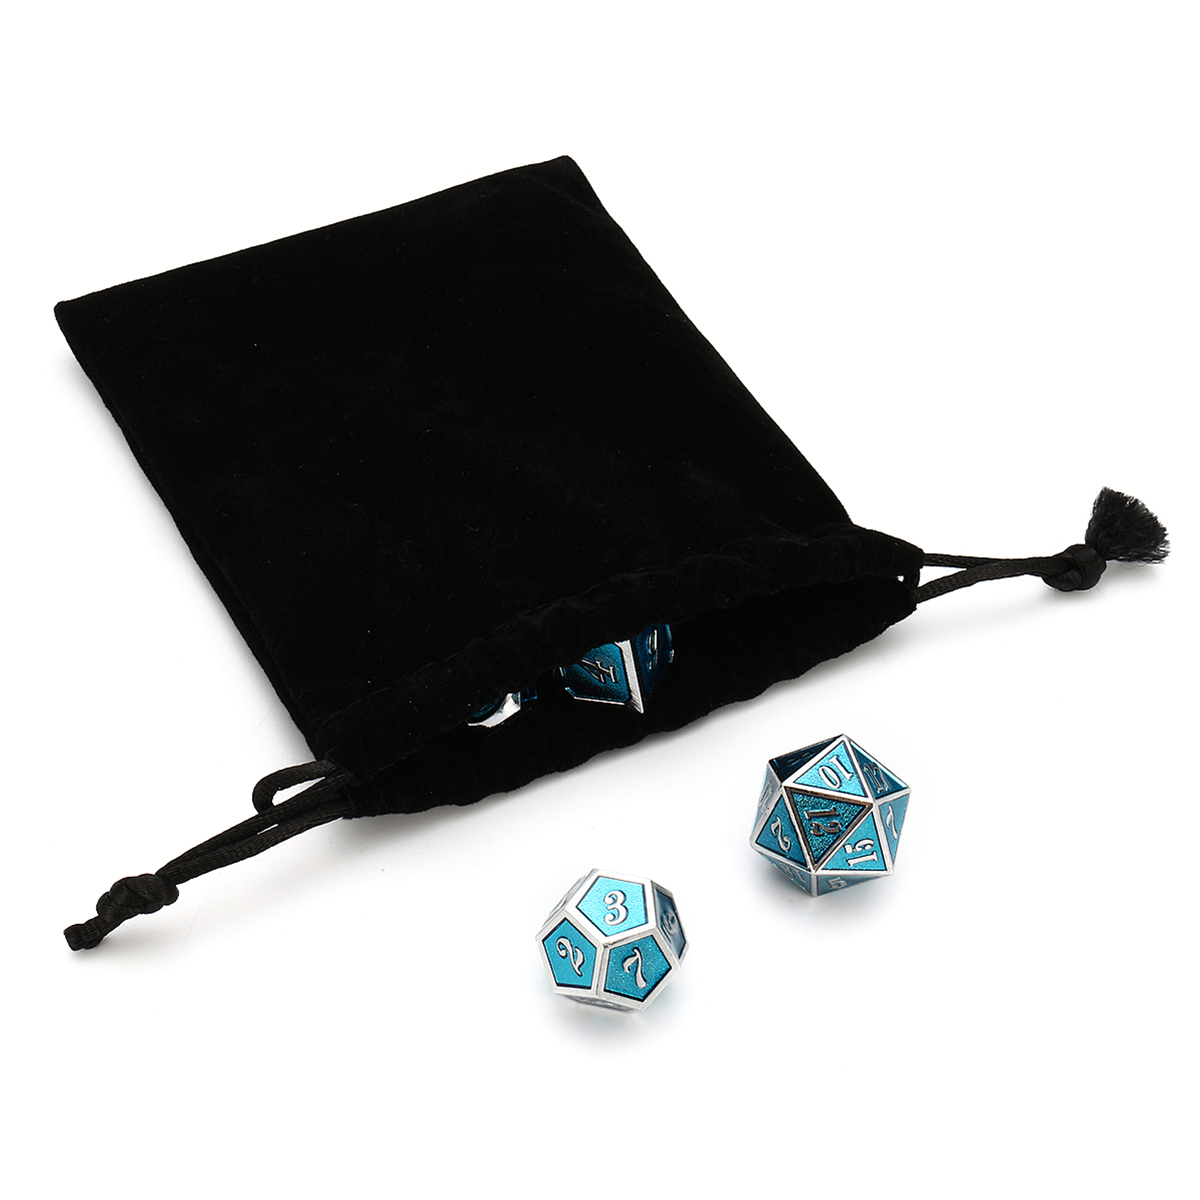 7pcs-Zinc-Alloy-Multisided-Dices-Set-Enamel-Embossed-Heavy-Metal-Polyhedral-Dice-With-Bag-1272100-5